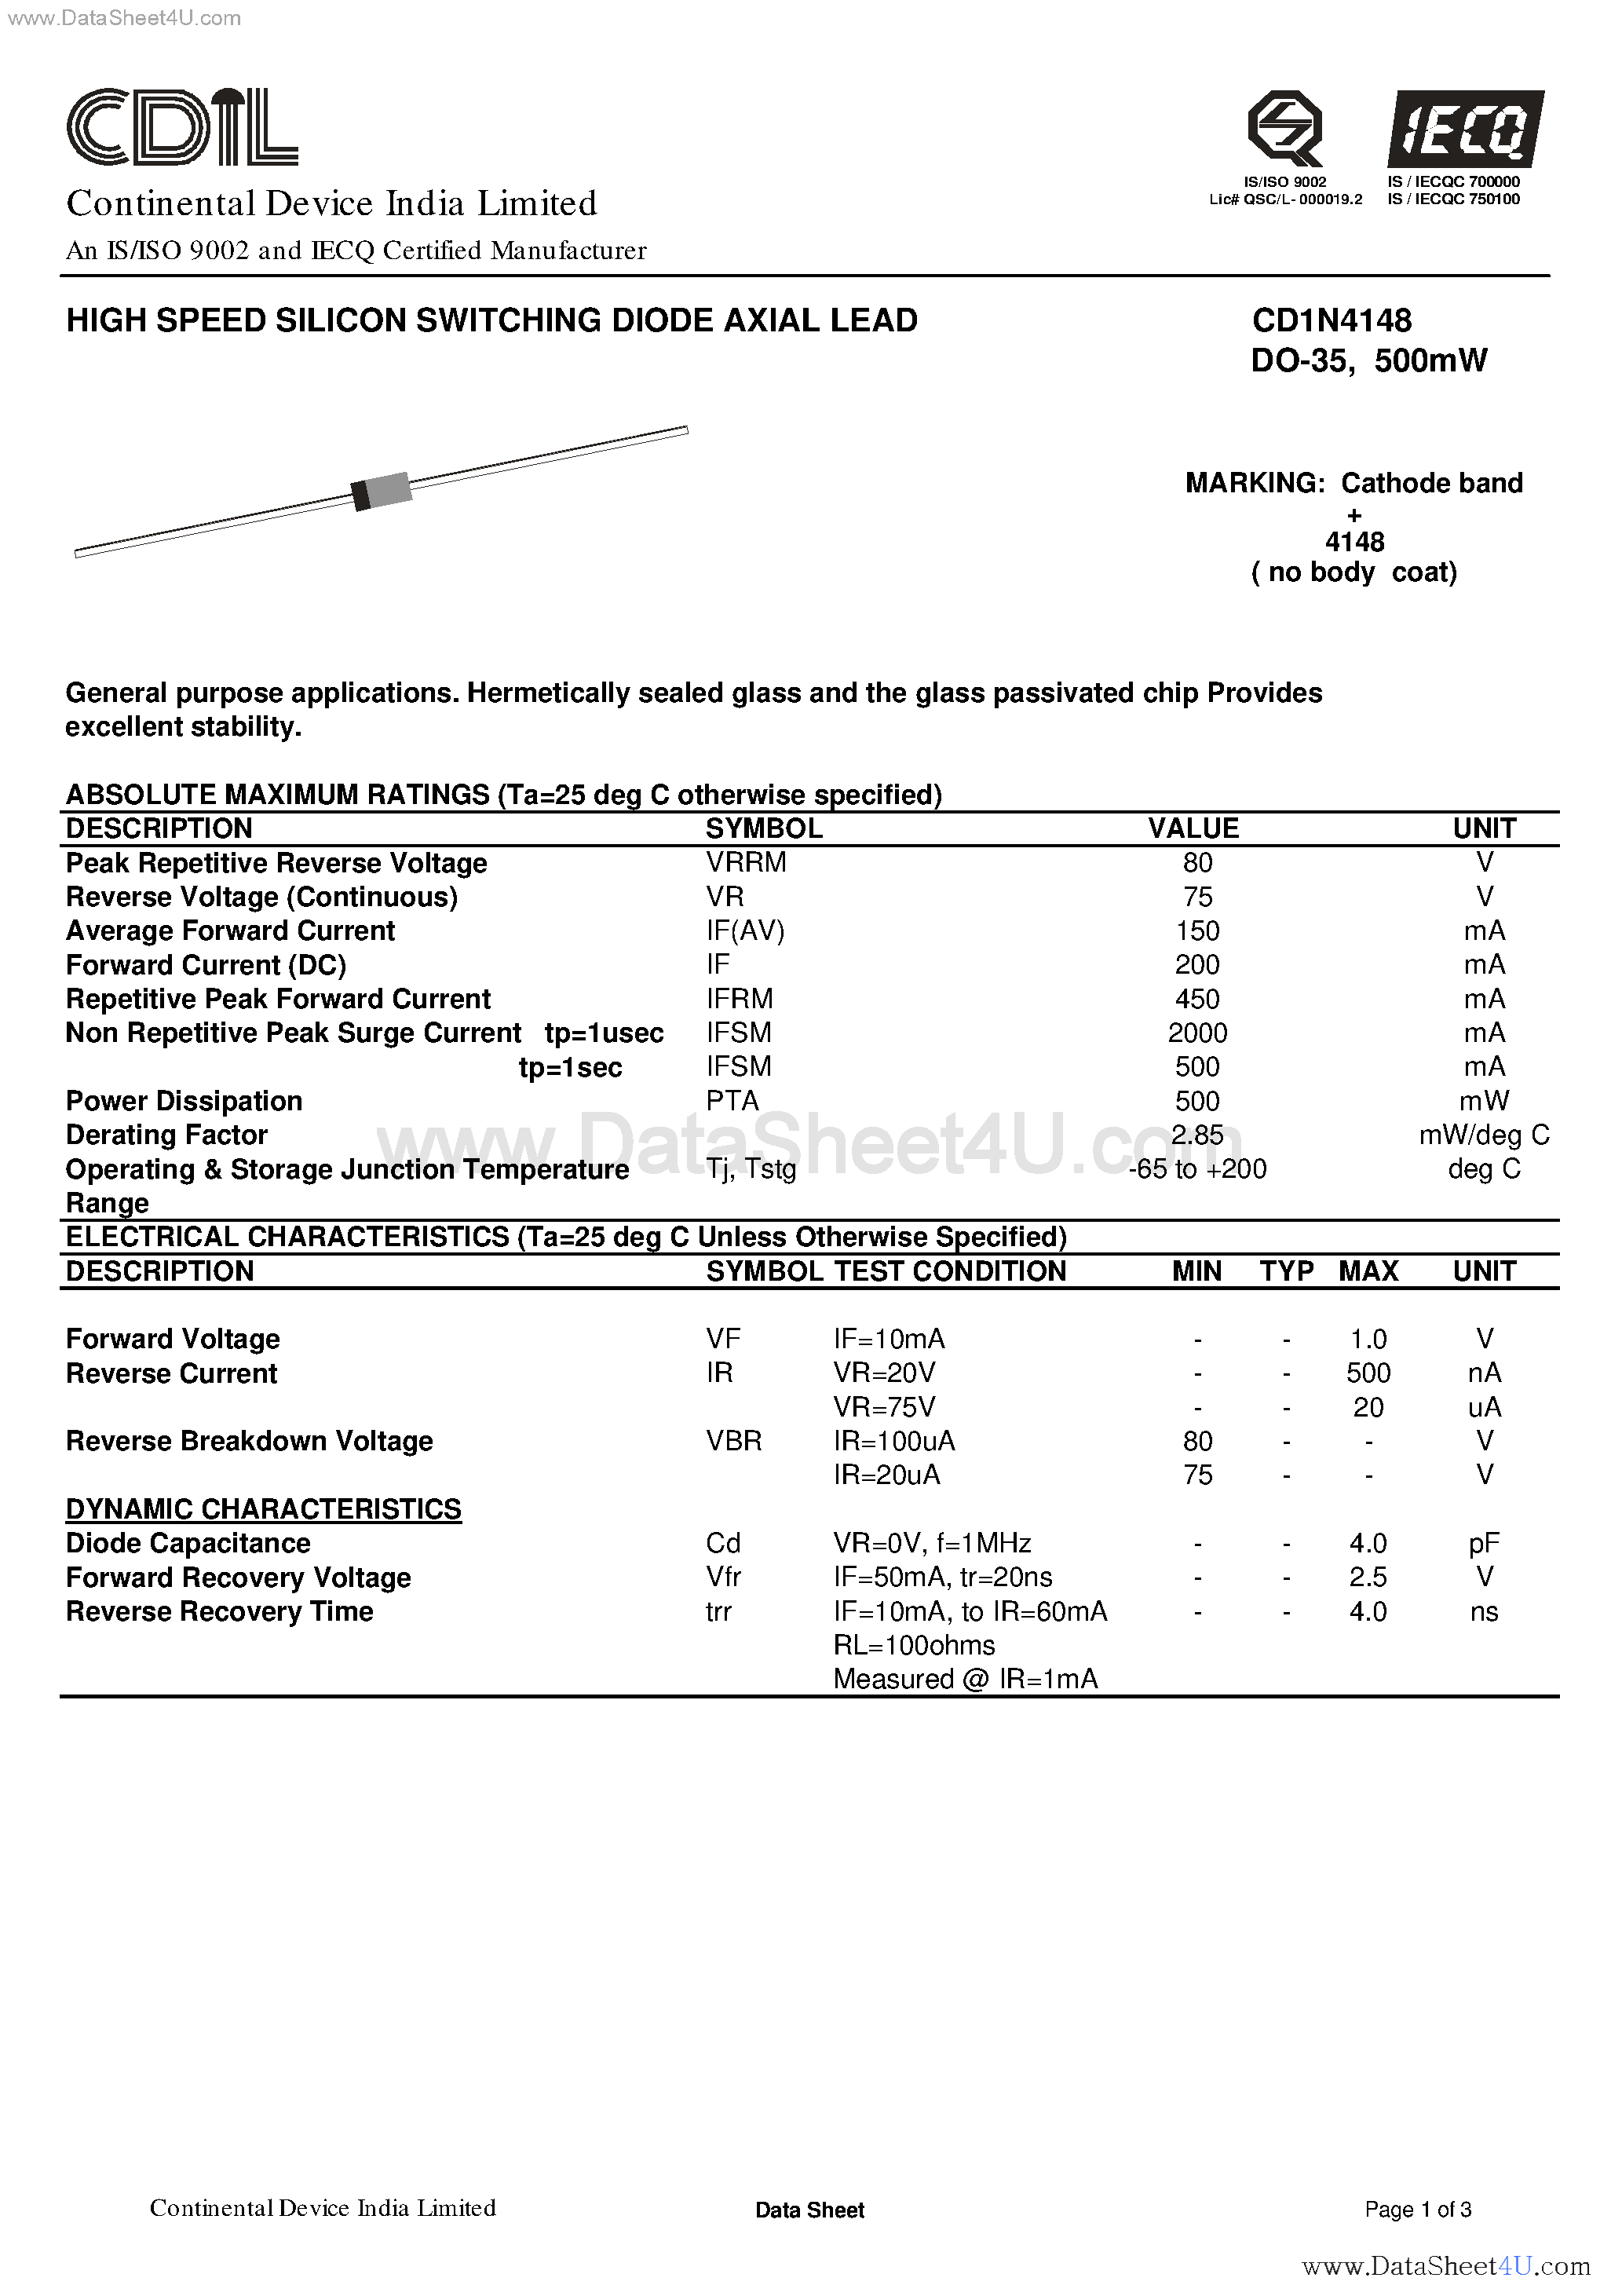 Datasheet CD1N4148 - High Speed Silicon Switching Diode Axial Lead page 1